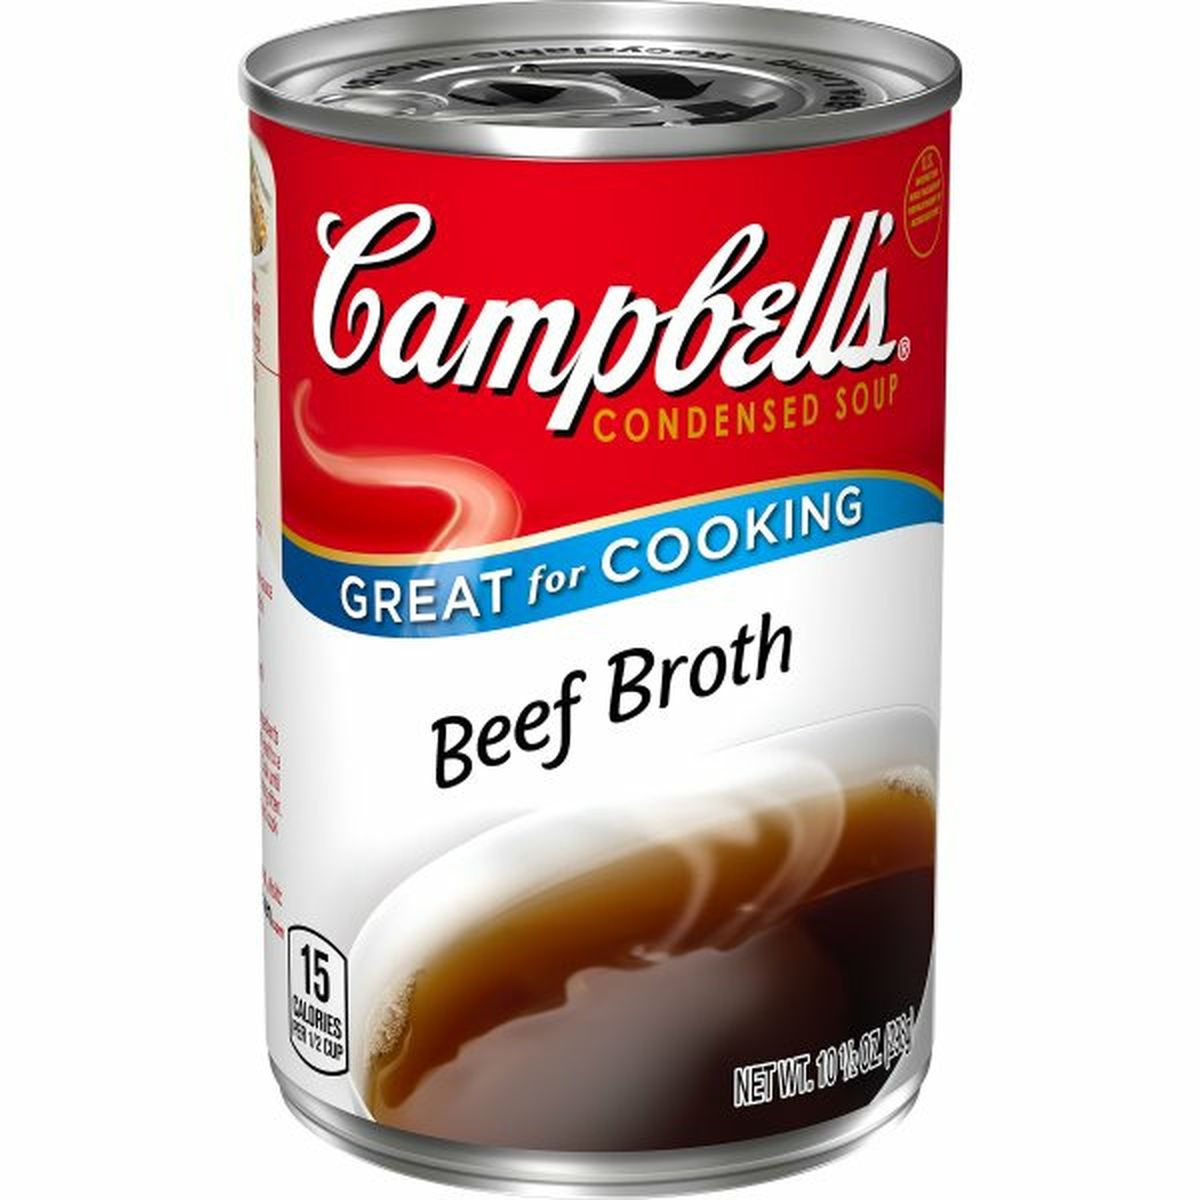 Calories in Campbell'ss Condensed Beef Broth